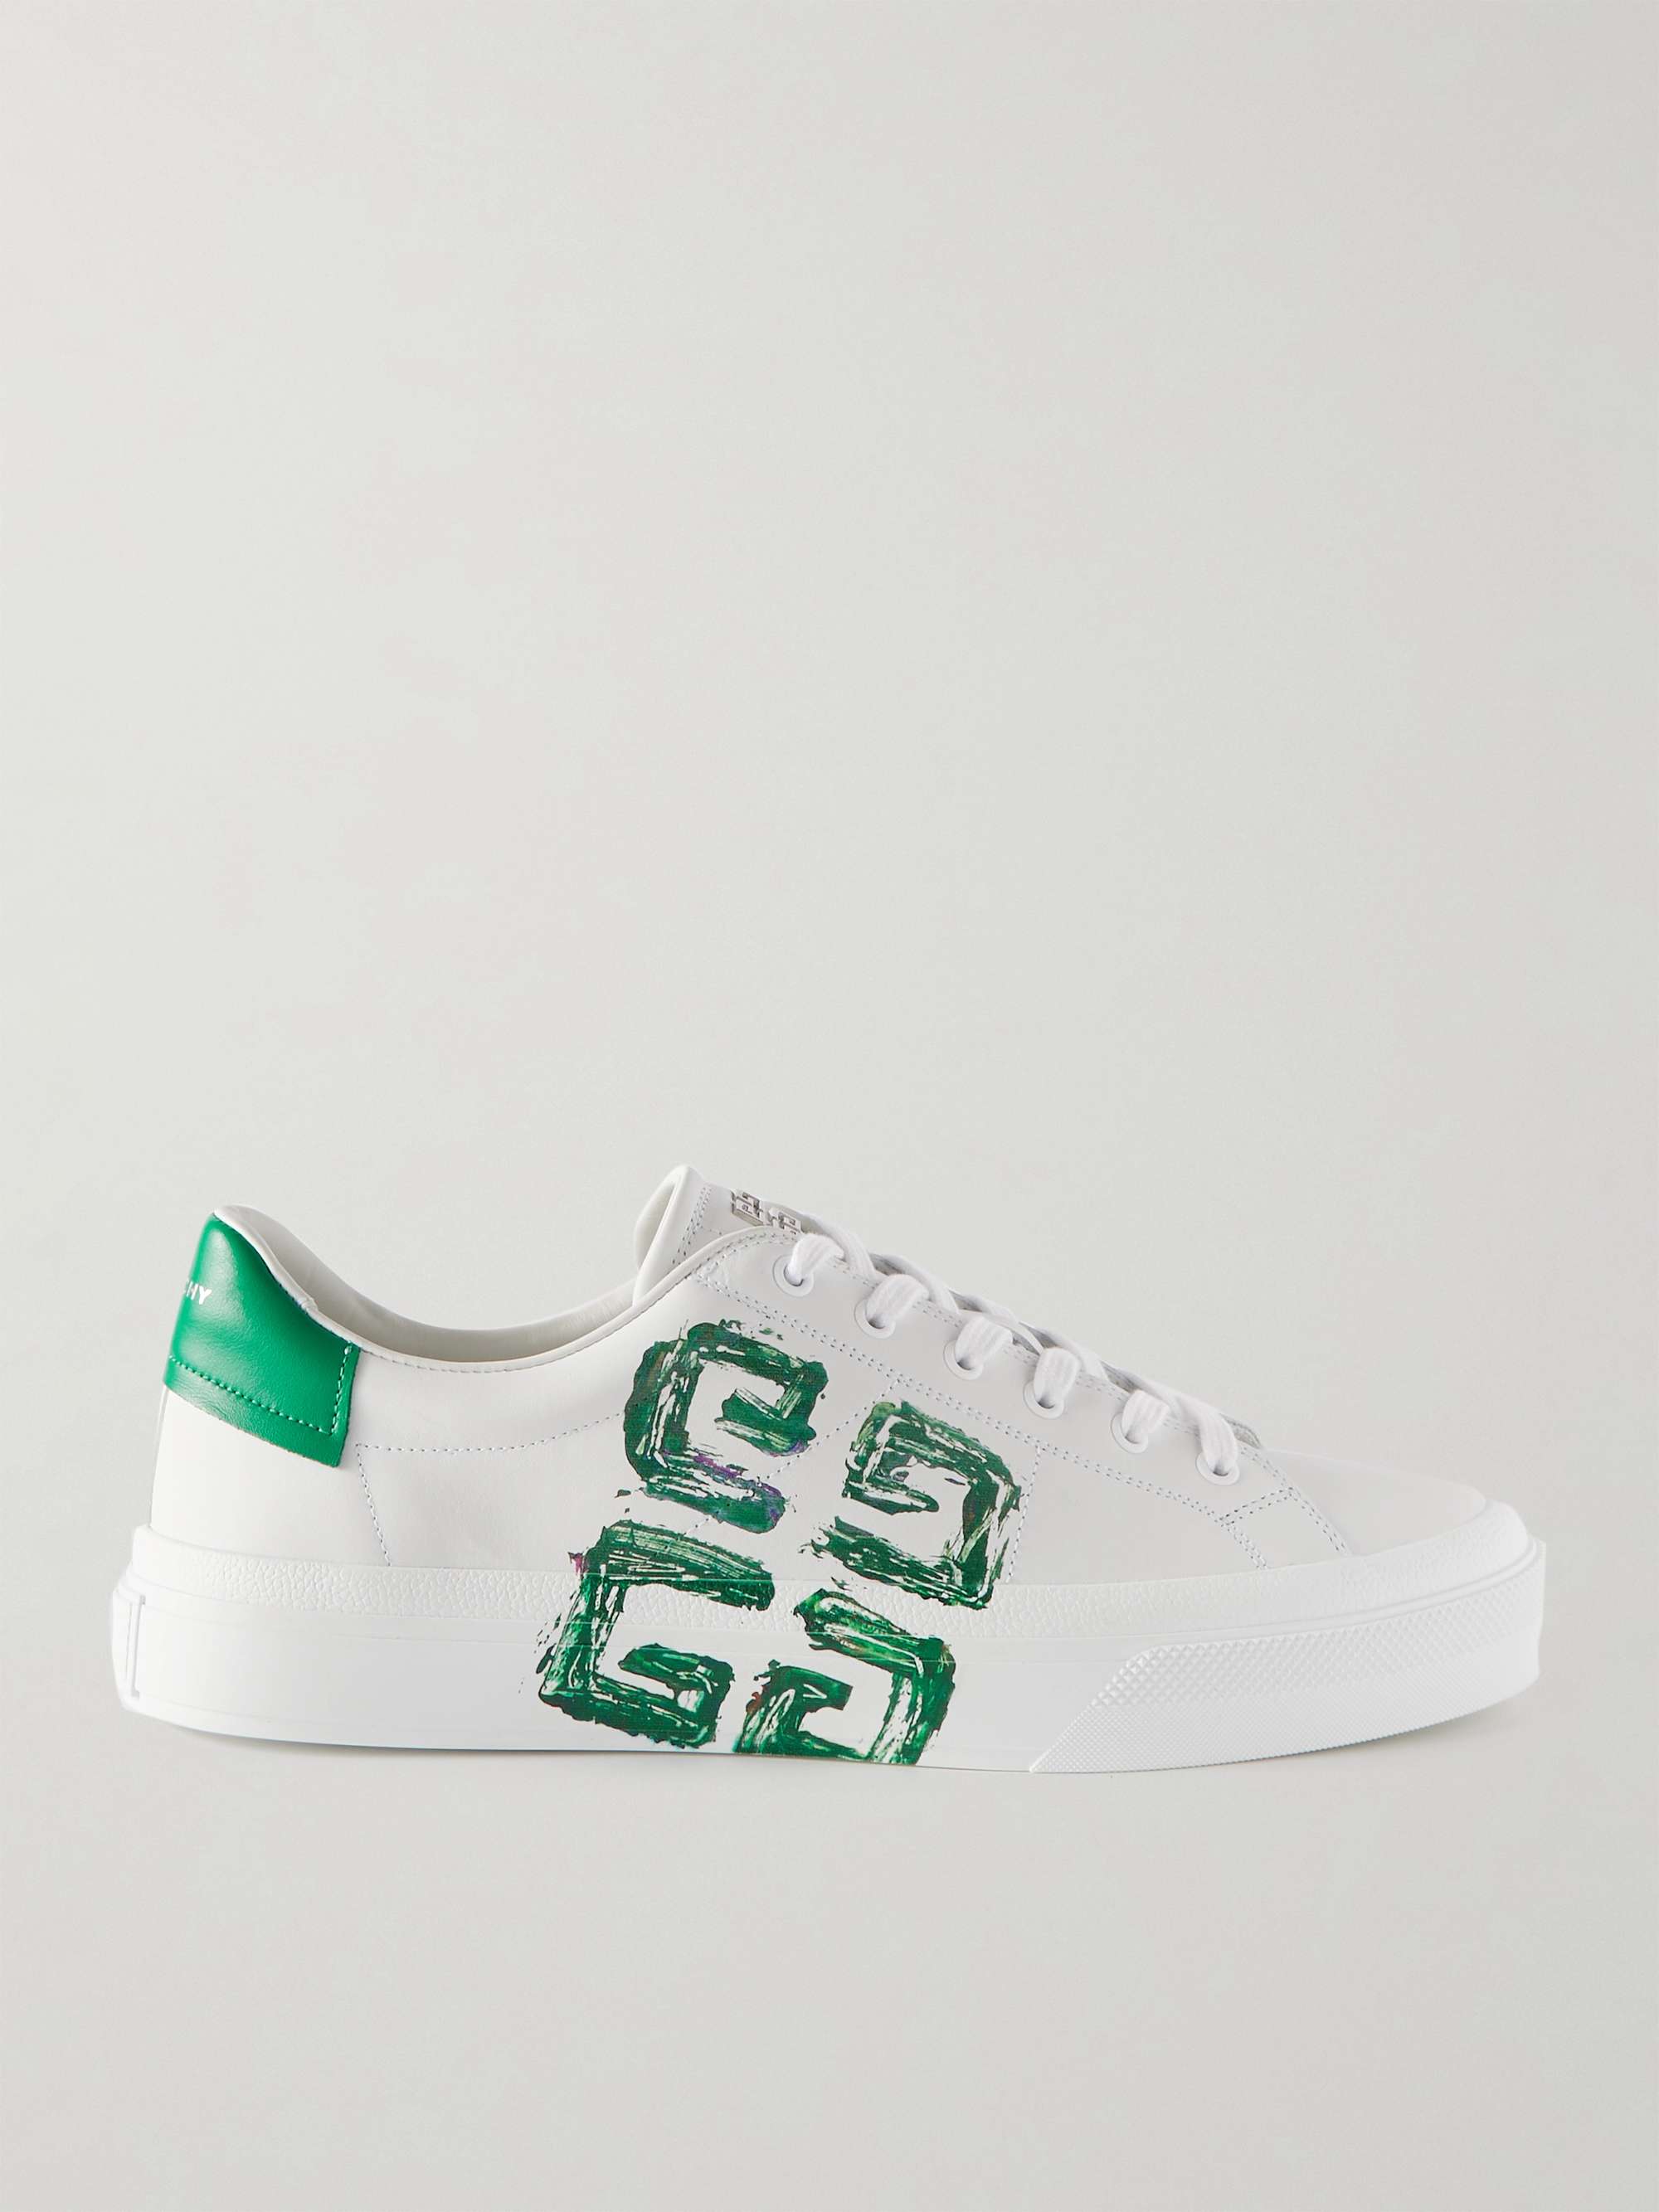 GIVENCHY City Sport Logo-Print Leather Sneakers | MR PORTER